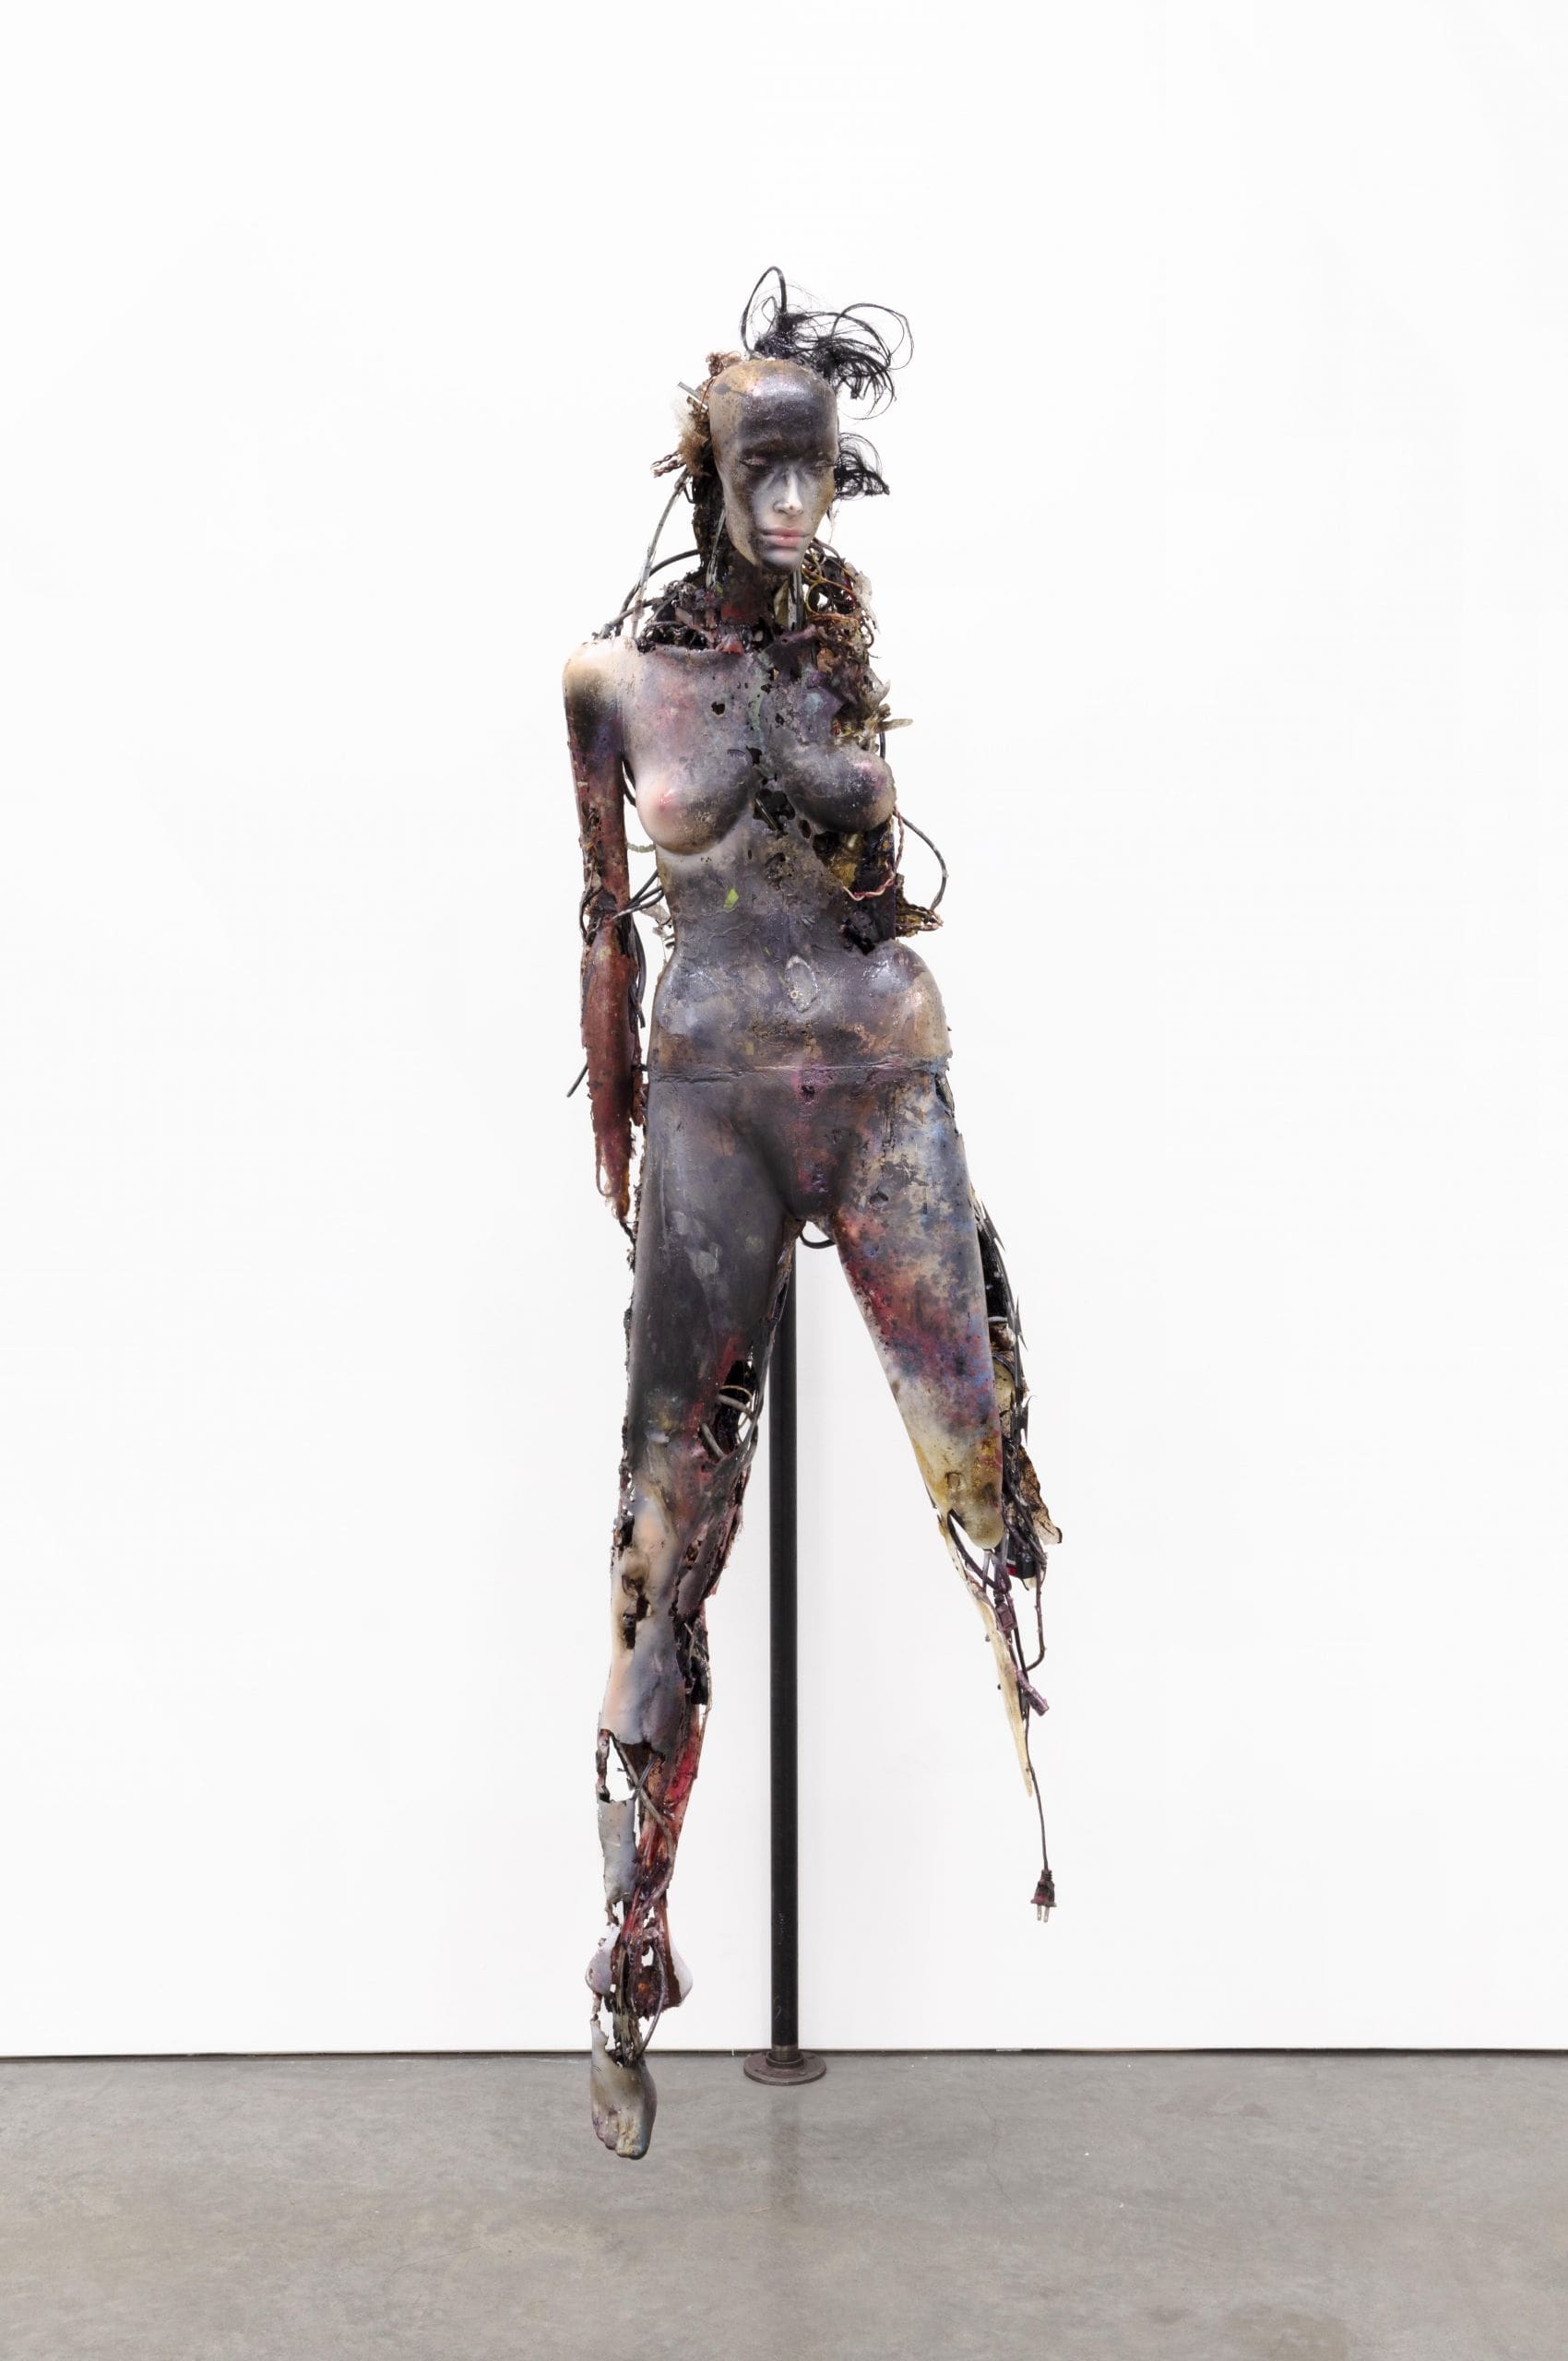 Stewart Uoo, Don't Touch Me (Unidentified Figure I), 2018, polyurethane and urethane resin, epoxy, ink, pigment, acrylic paint, ferrofluid, wires, cables, CDRs, DVDs, video cassettes, mobile phone screens, electronics, clothing, accessories, acrylic nails, steel, razor wire, stainless steel barbells, synthetic hair, synthetic eyelashes, glitter, flies, maggot cocoons, dust, 82 × 28 × 26 inches (208.28 × 71.12 × 66.04 cm)